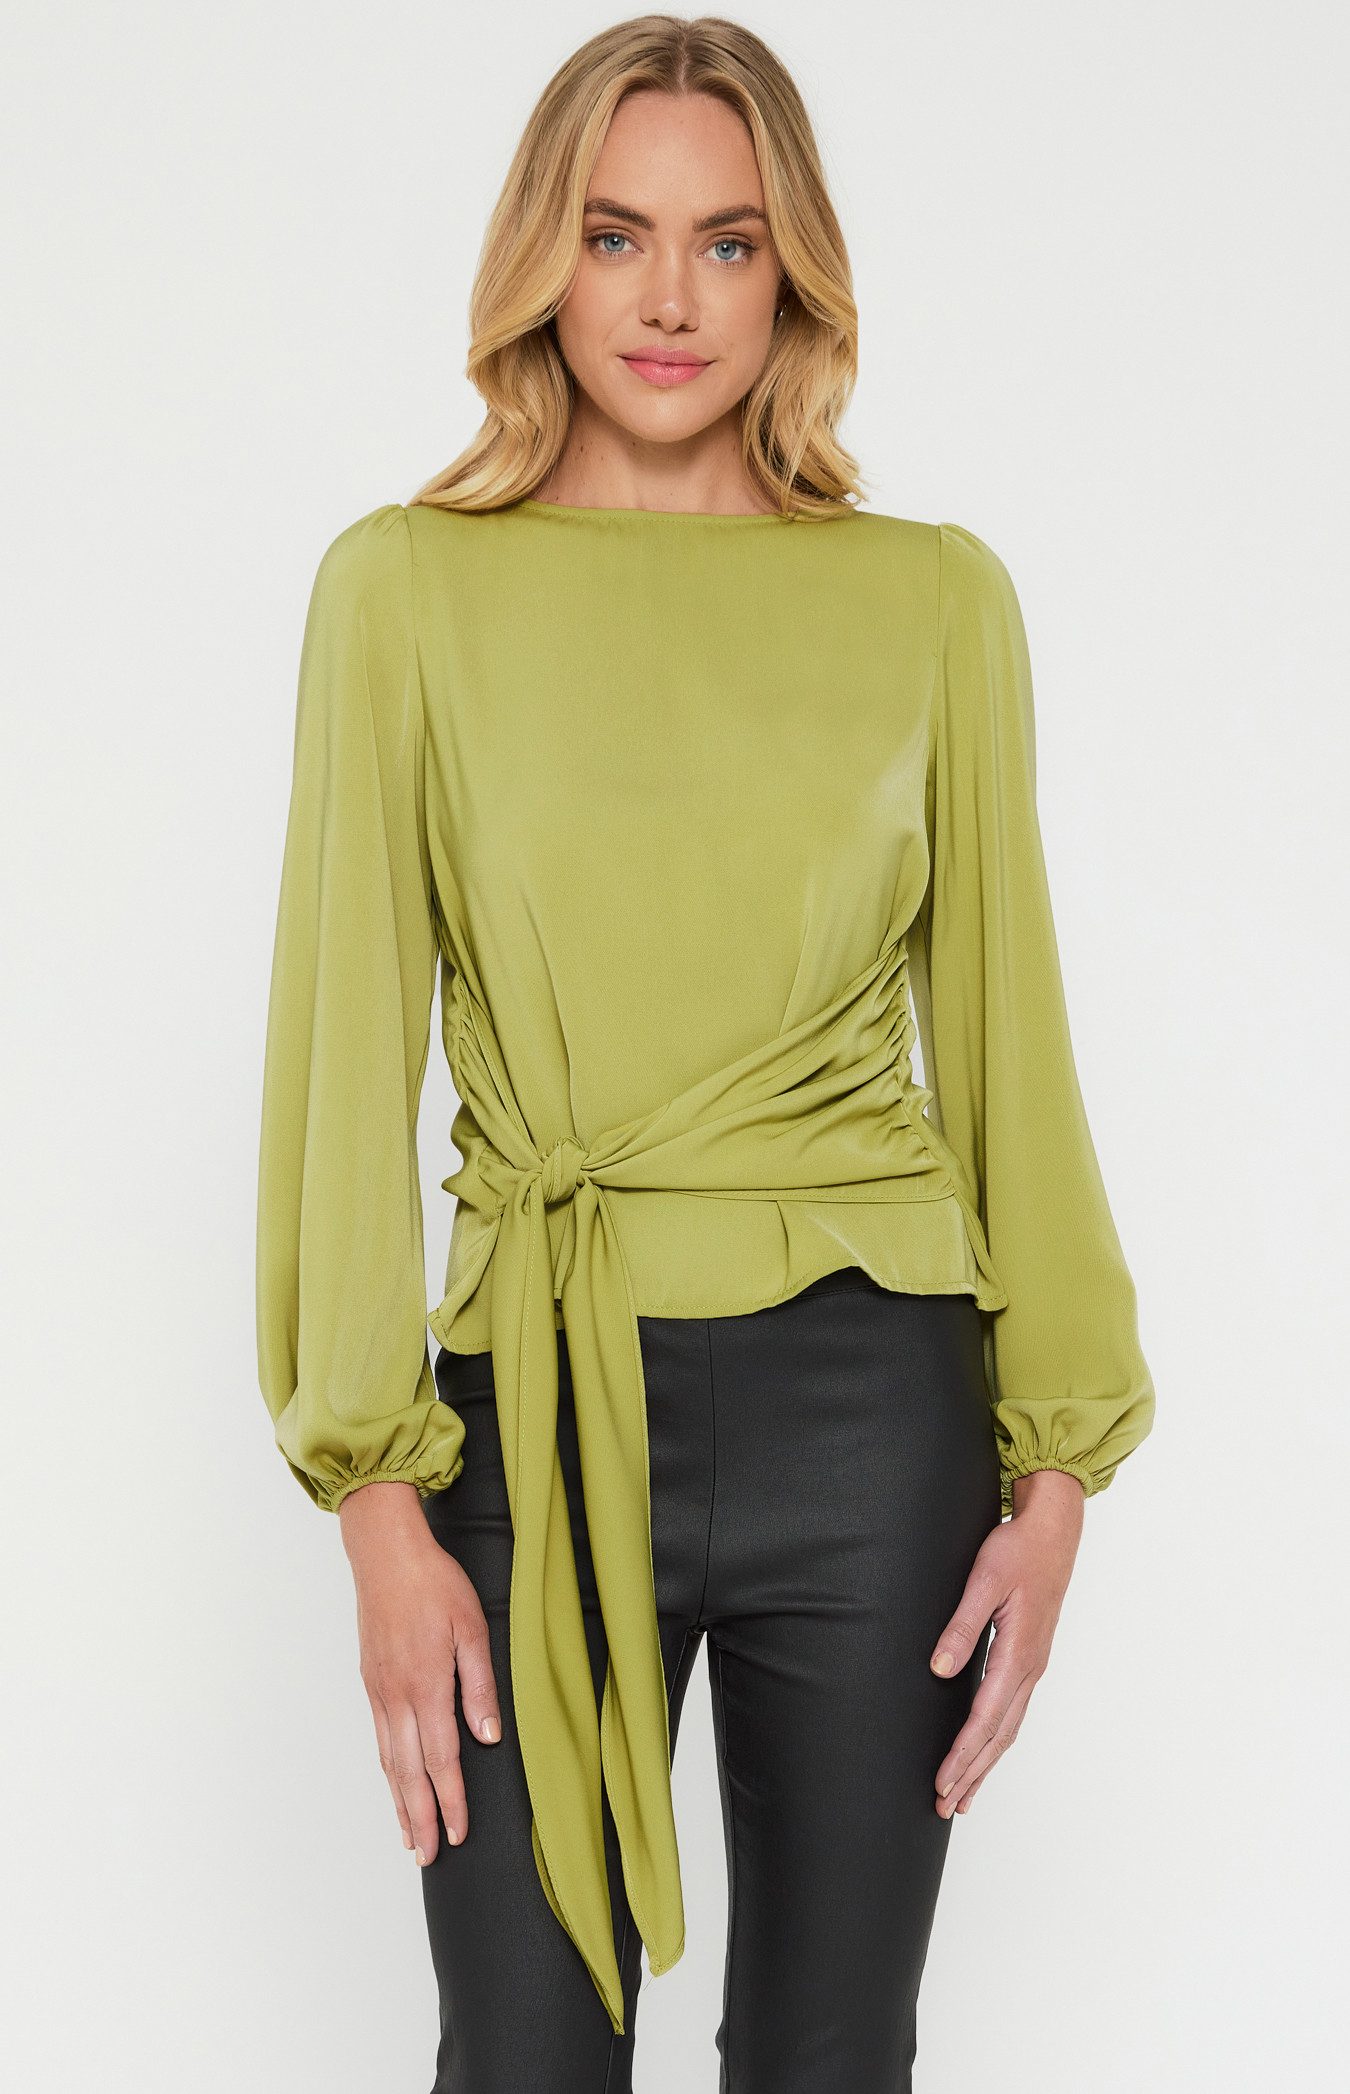 Boat Neckline Blouse with Side Tie Details (STO644A) | Style State